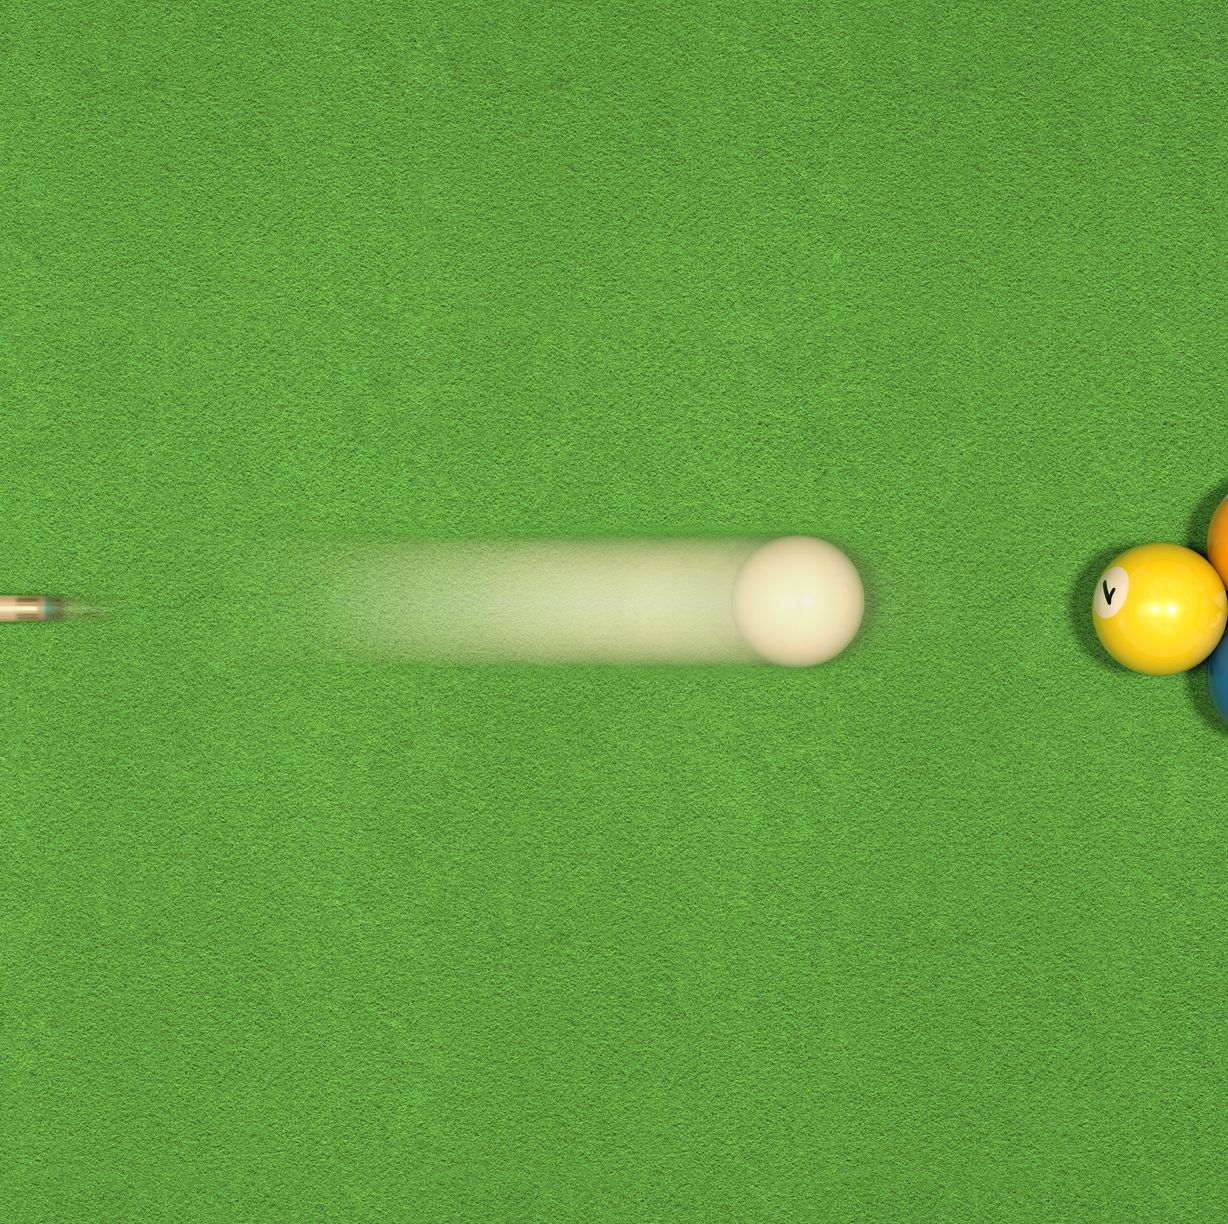 Mathematicians Gave a Billiard Ball a Brain—and It Led to Something Unbelievable